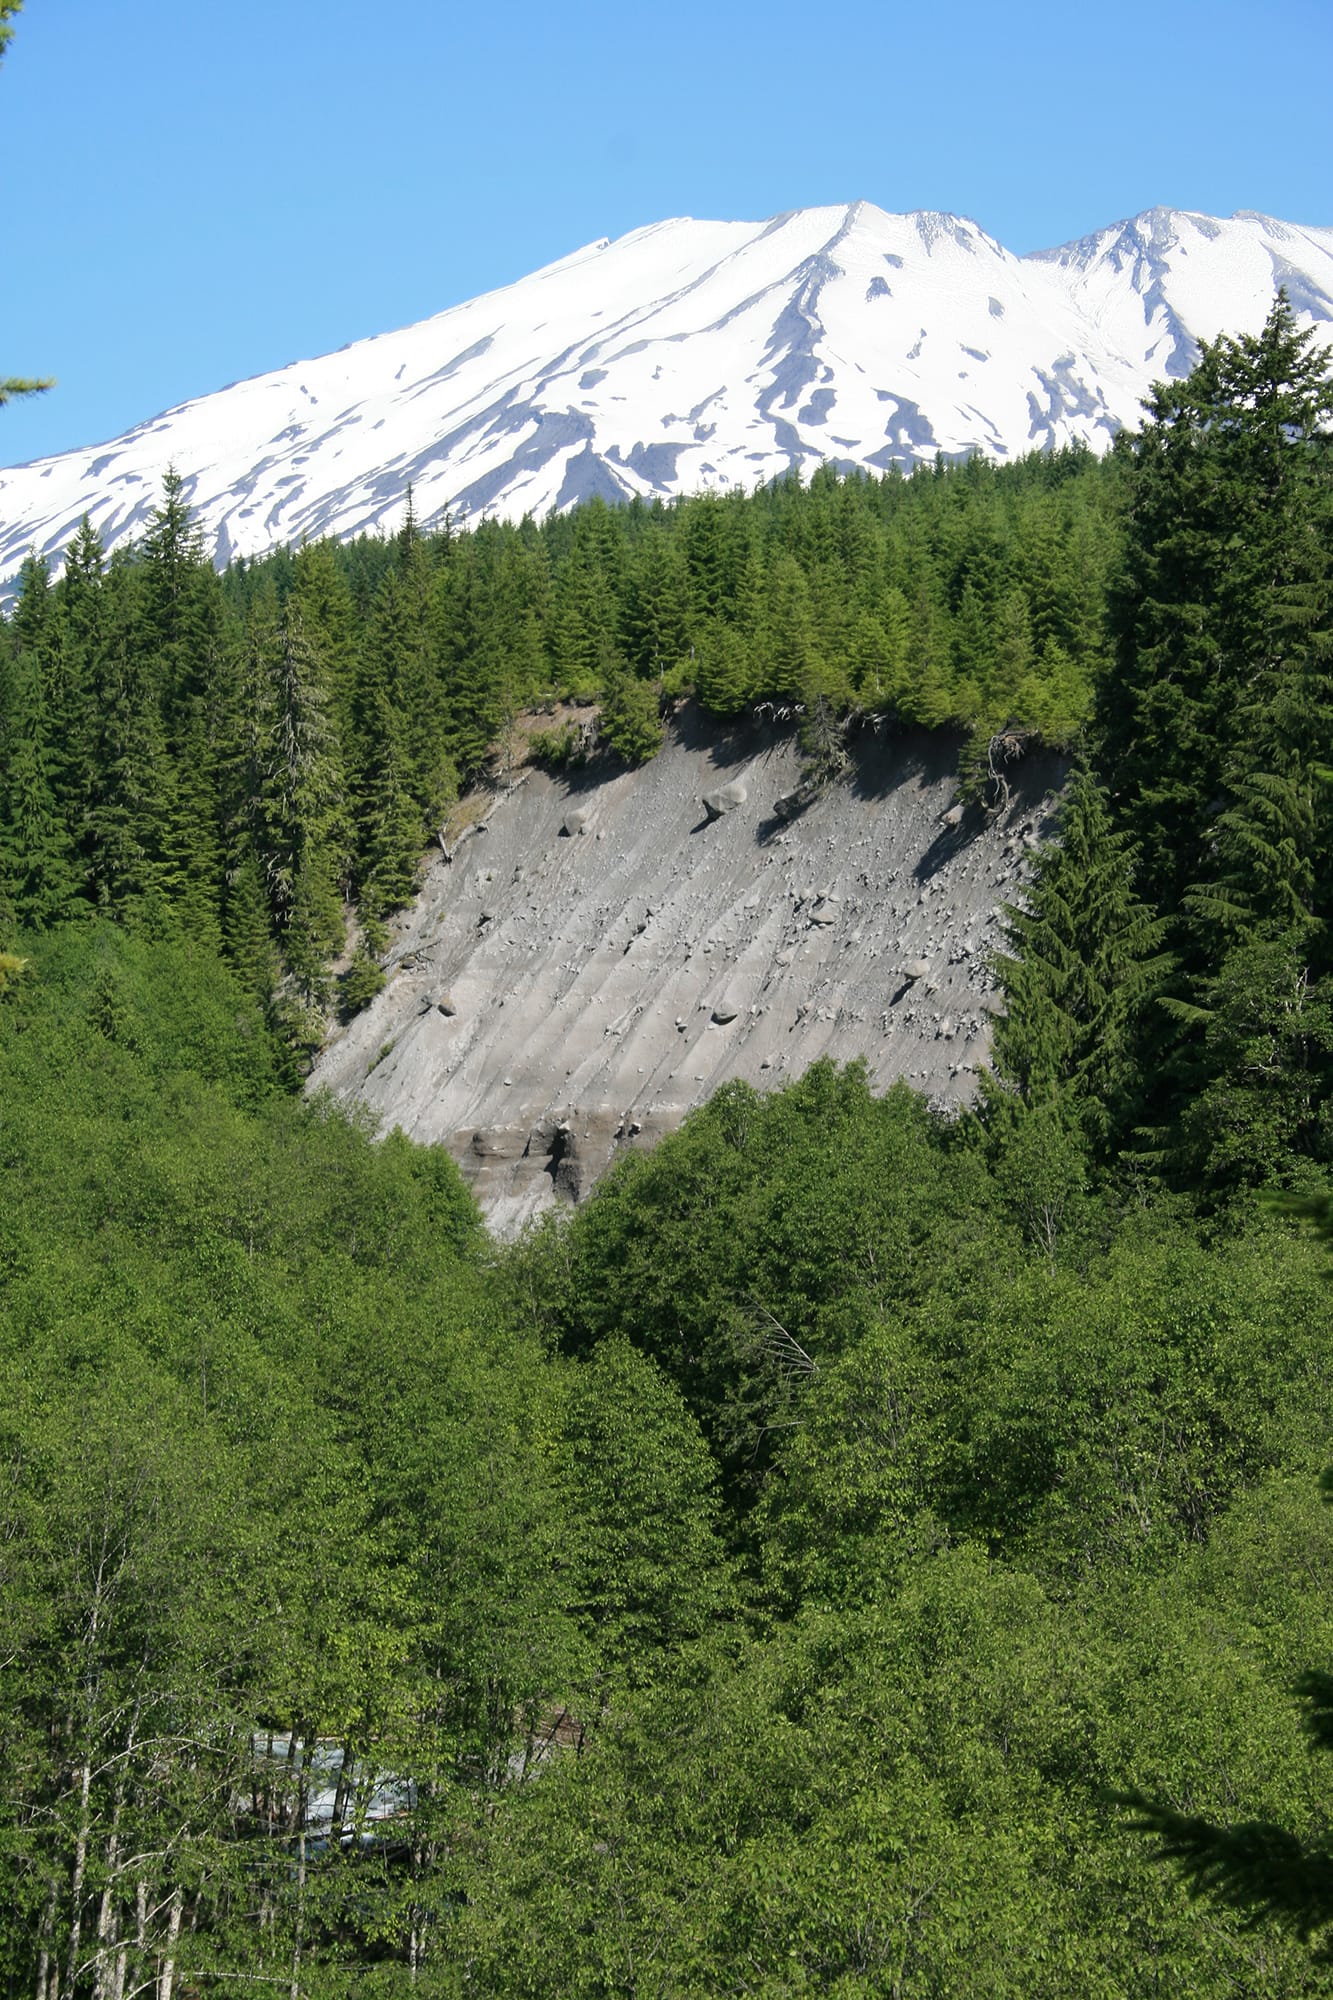 Columbia Land Trust on Monday announced the conservation of more than 3,000 acres of forestland near Mount St. Helens.